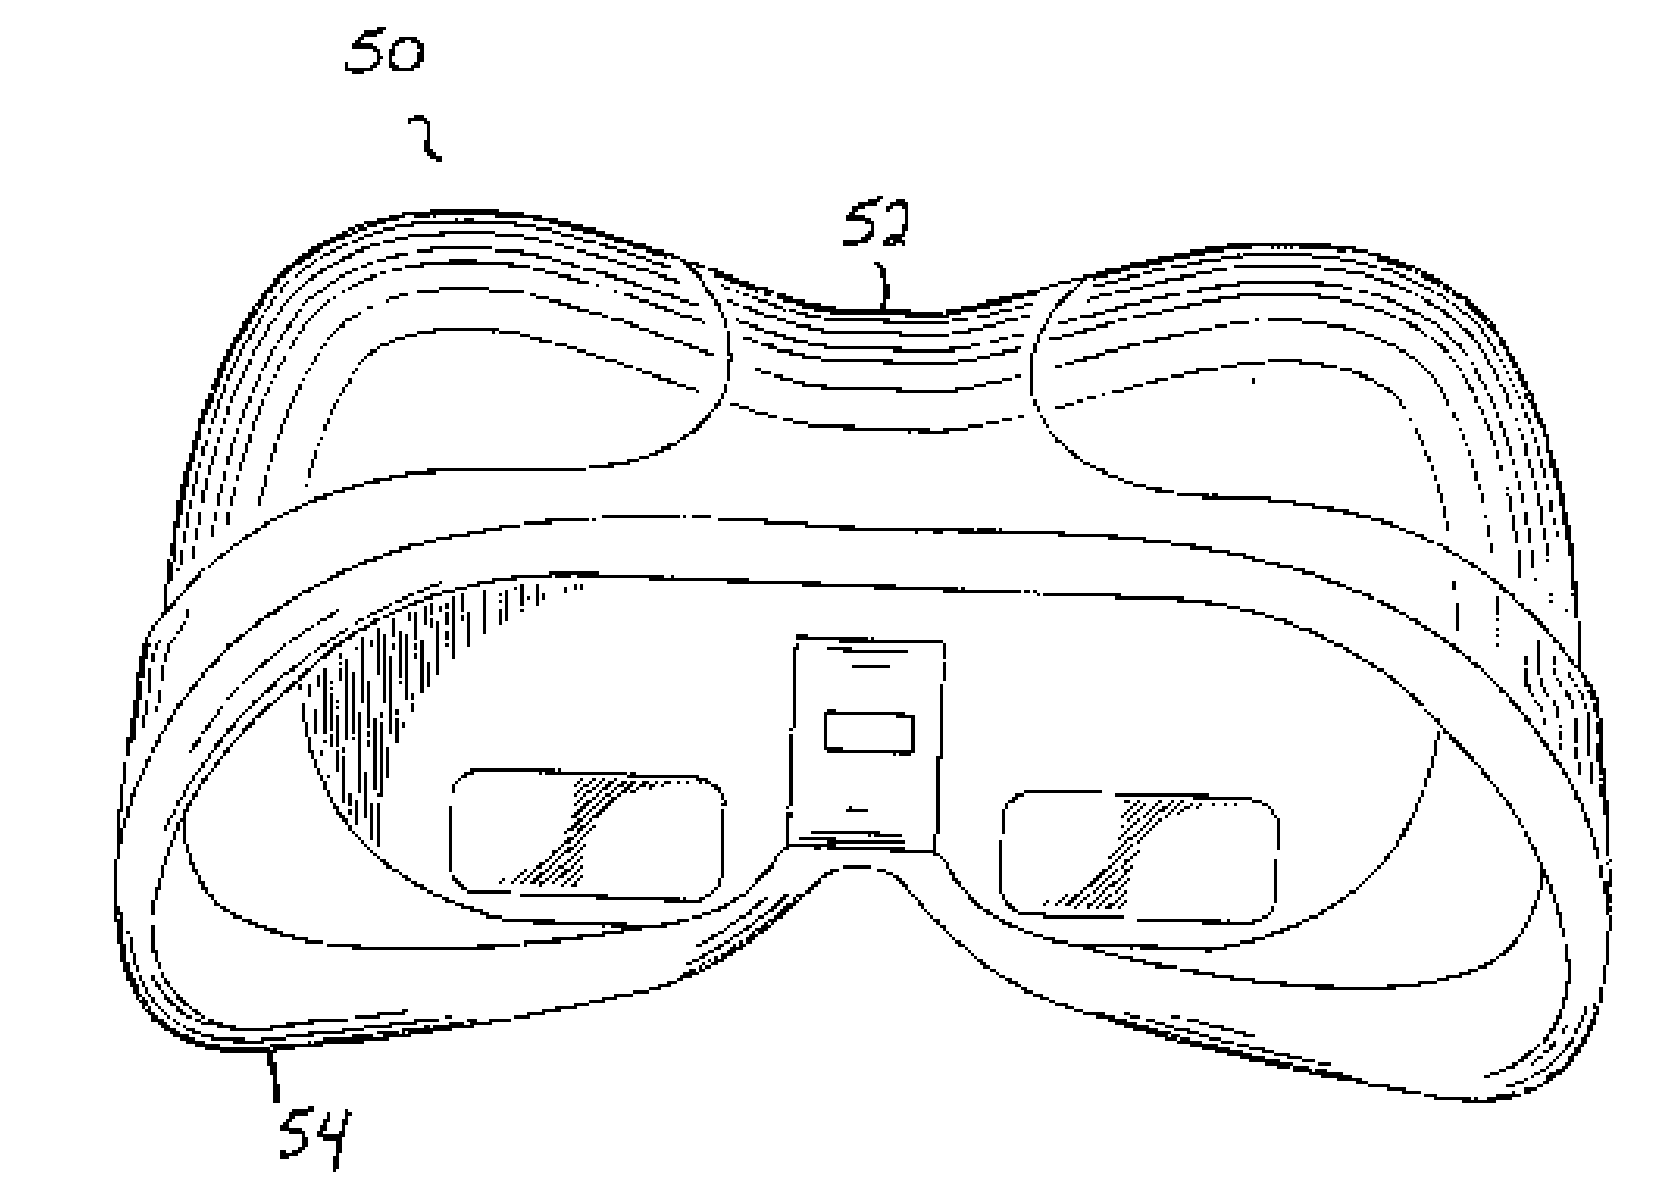 Electronic handheld audio/video receiver and listening/viewing device